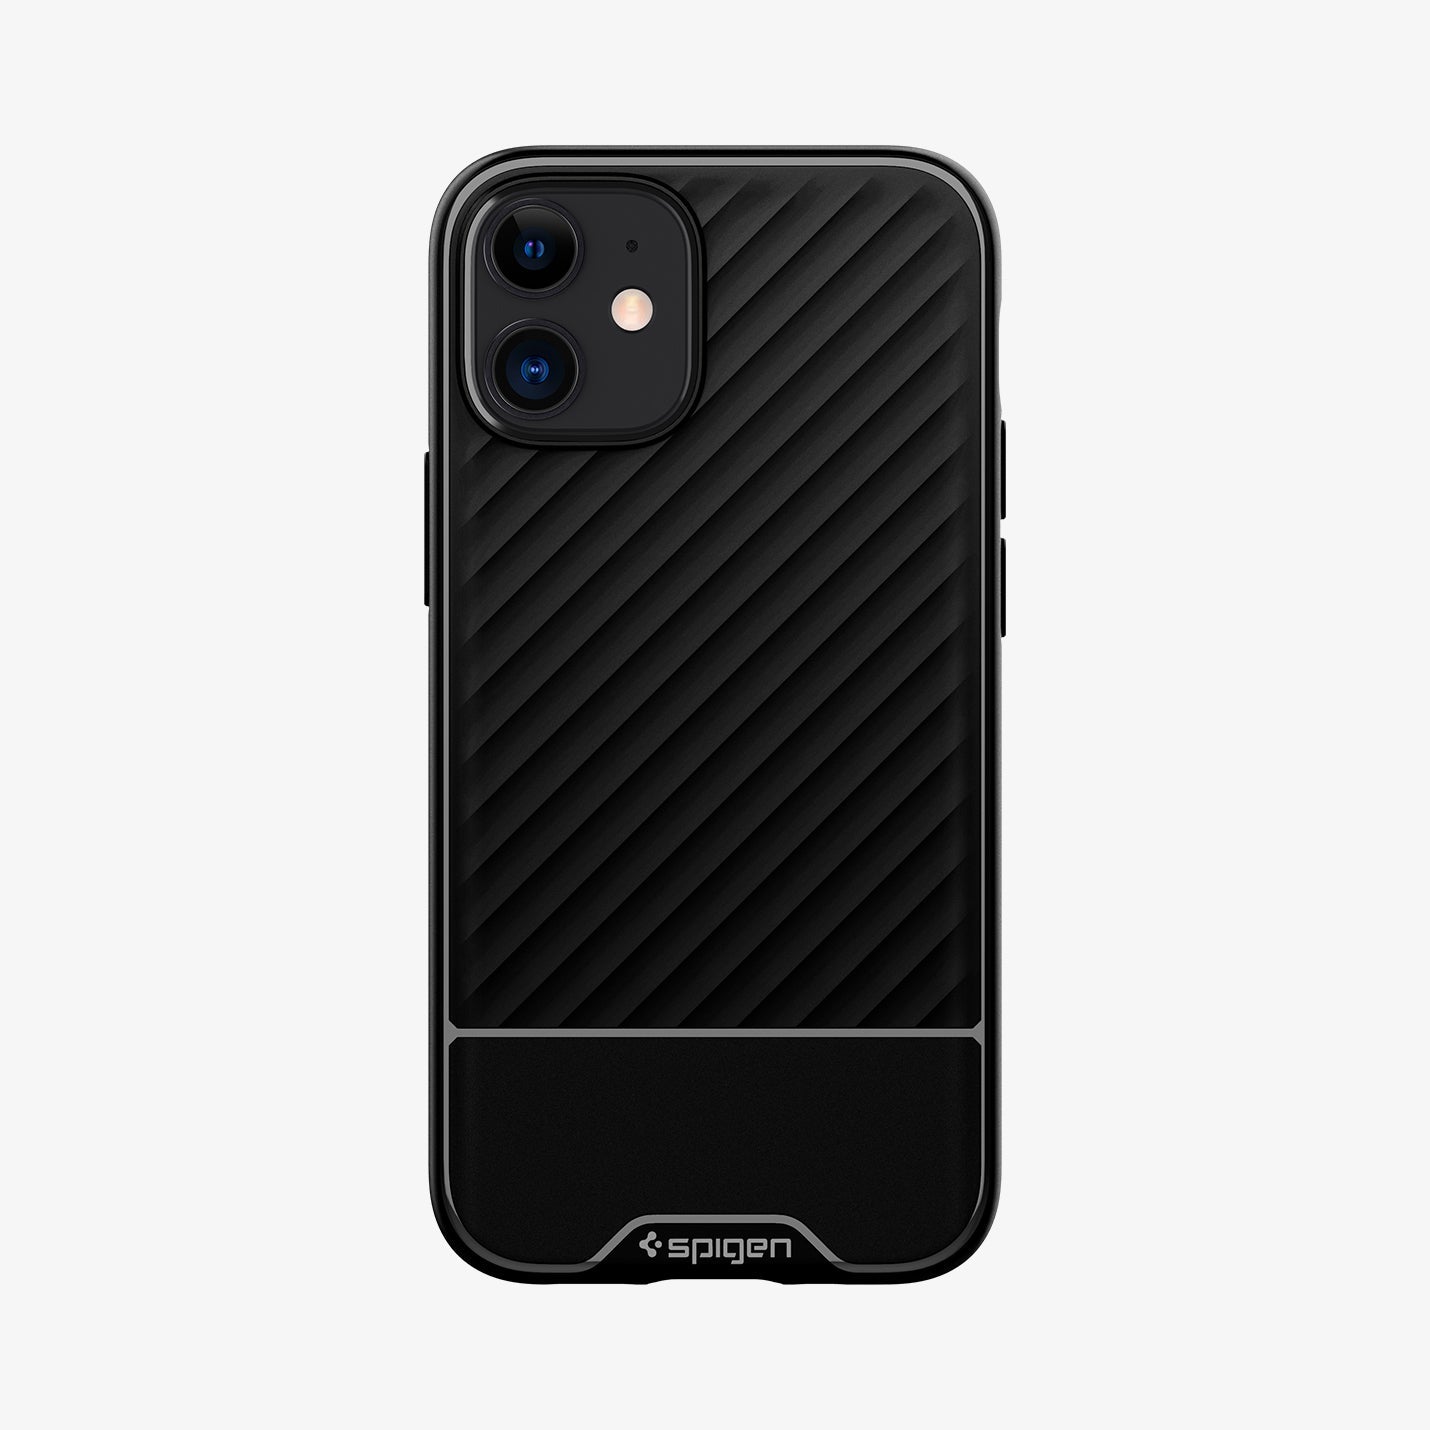 ACS01537 - iPhone 12 Mini Case Core Armor in matte black showing the back